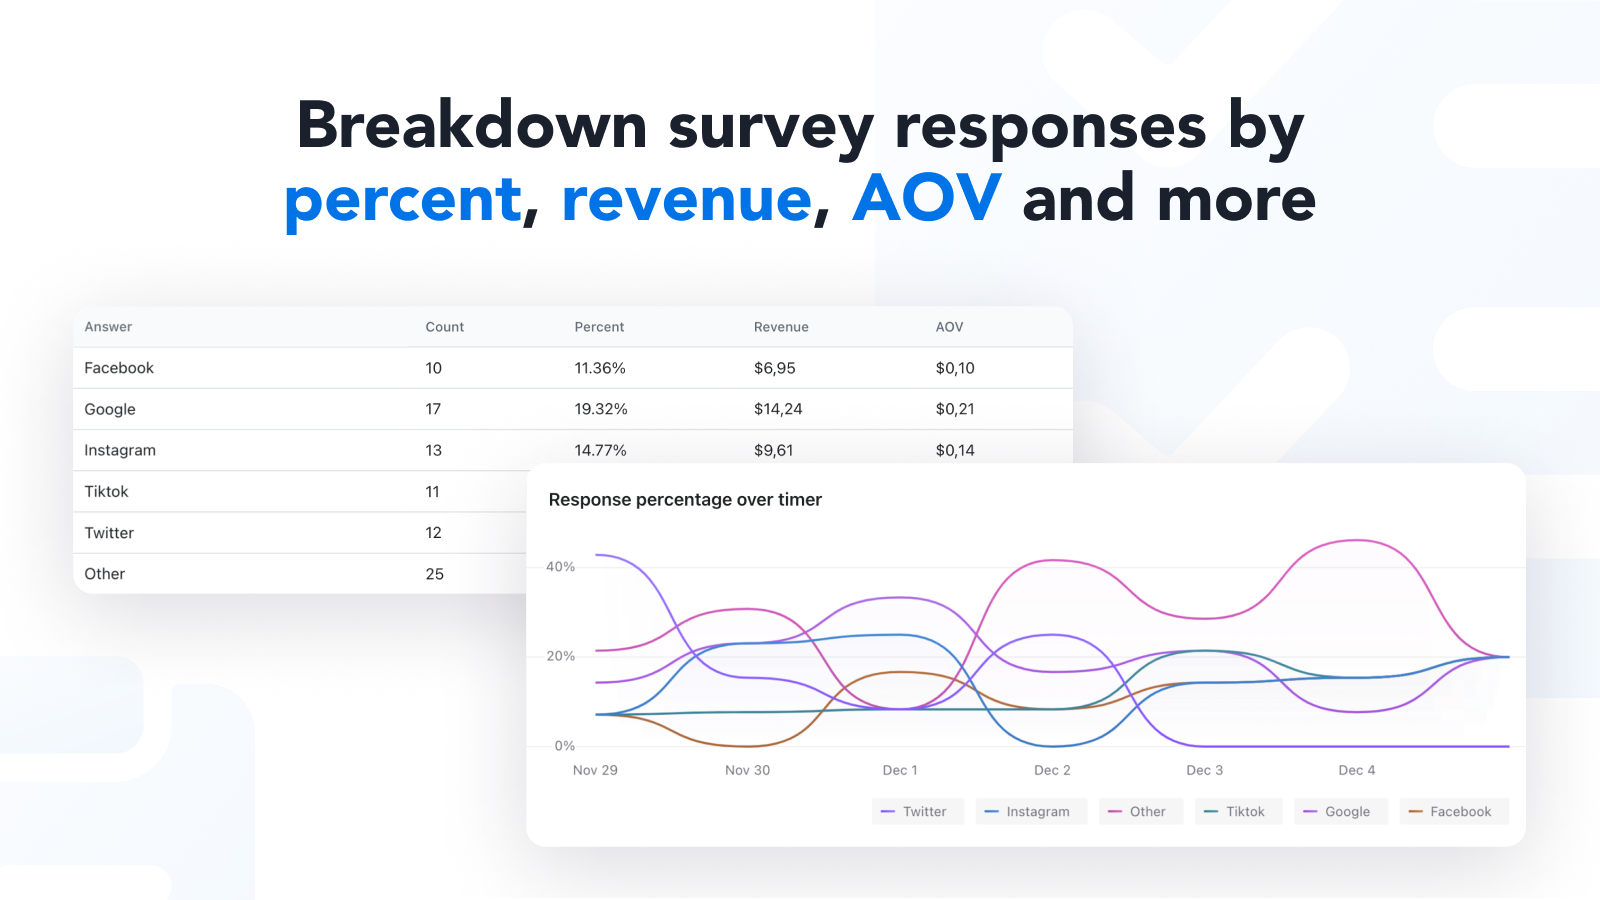 Breakdown survey responses by percent, revenue, AOV and more